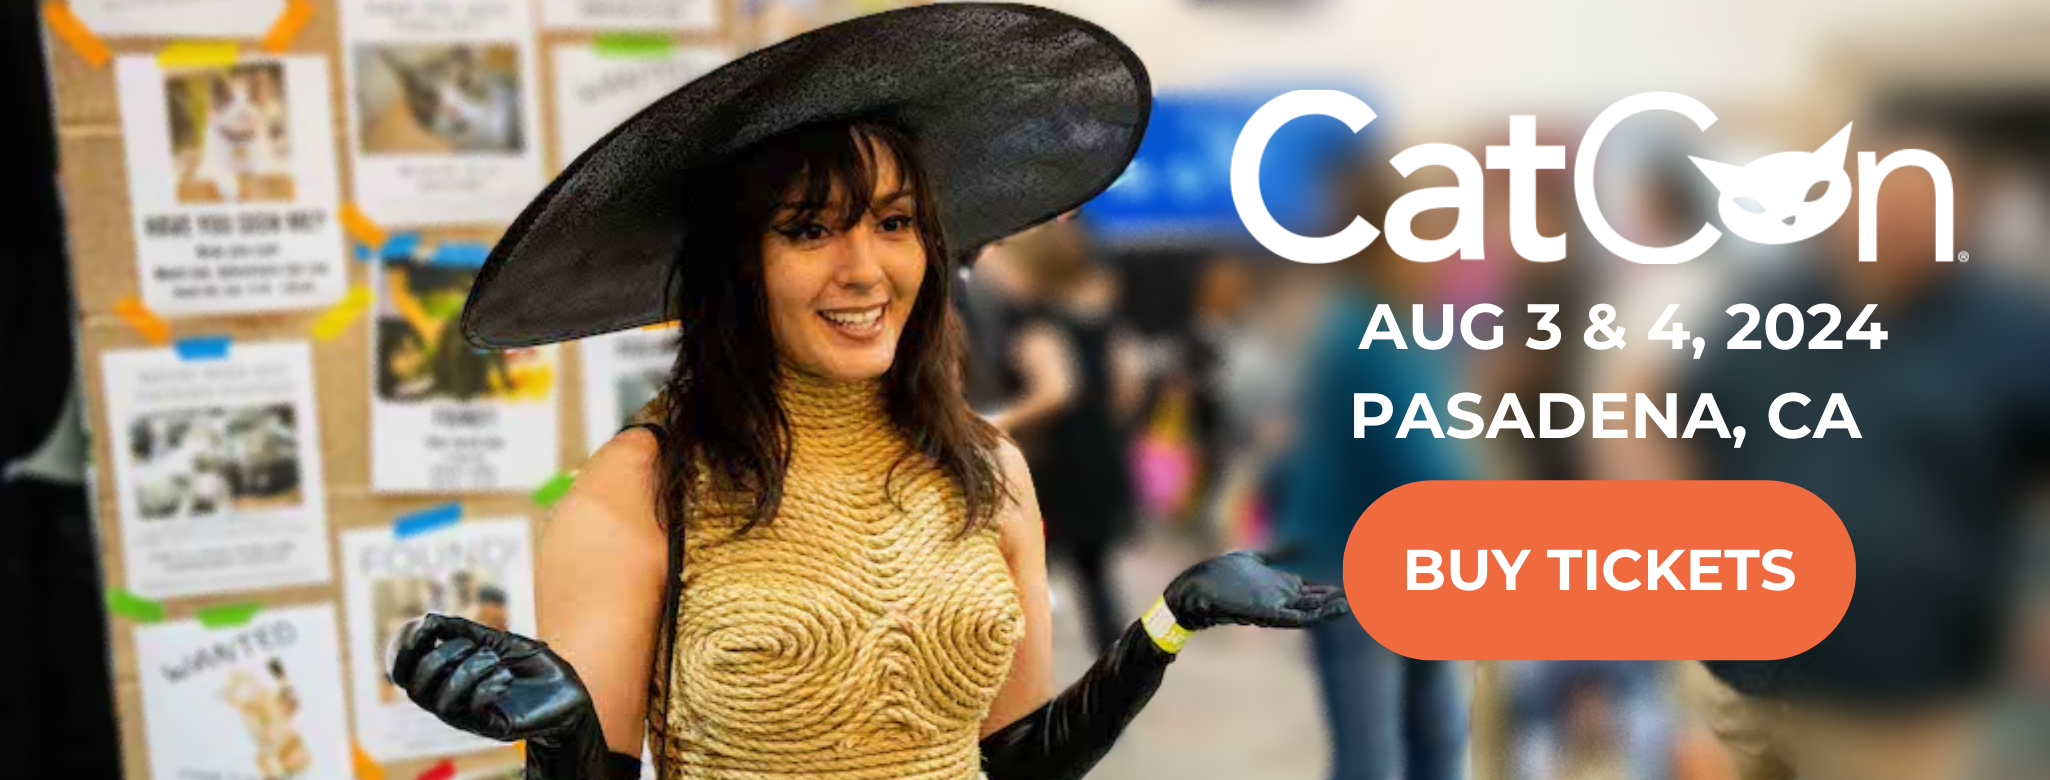 Cat cosplay at CatCon. BUY CATCON 2024 TICKETS NOW!